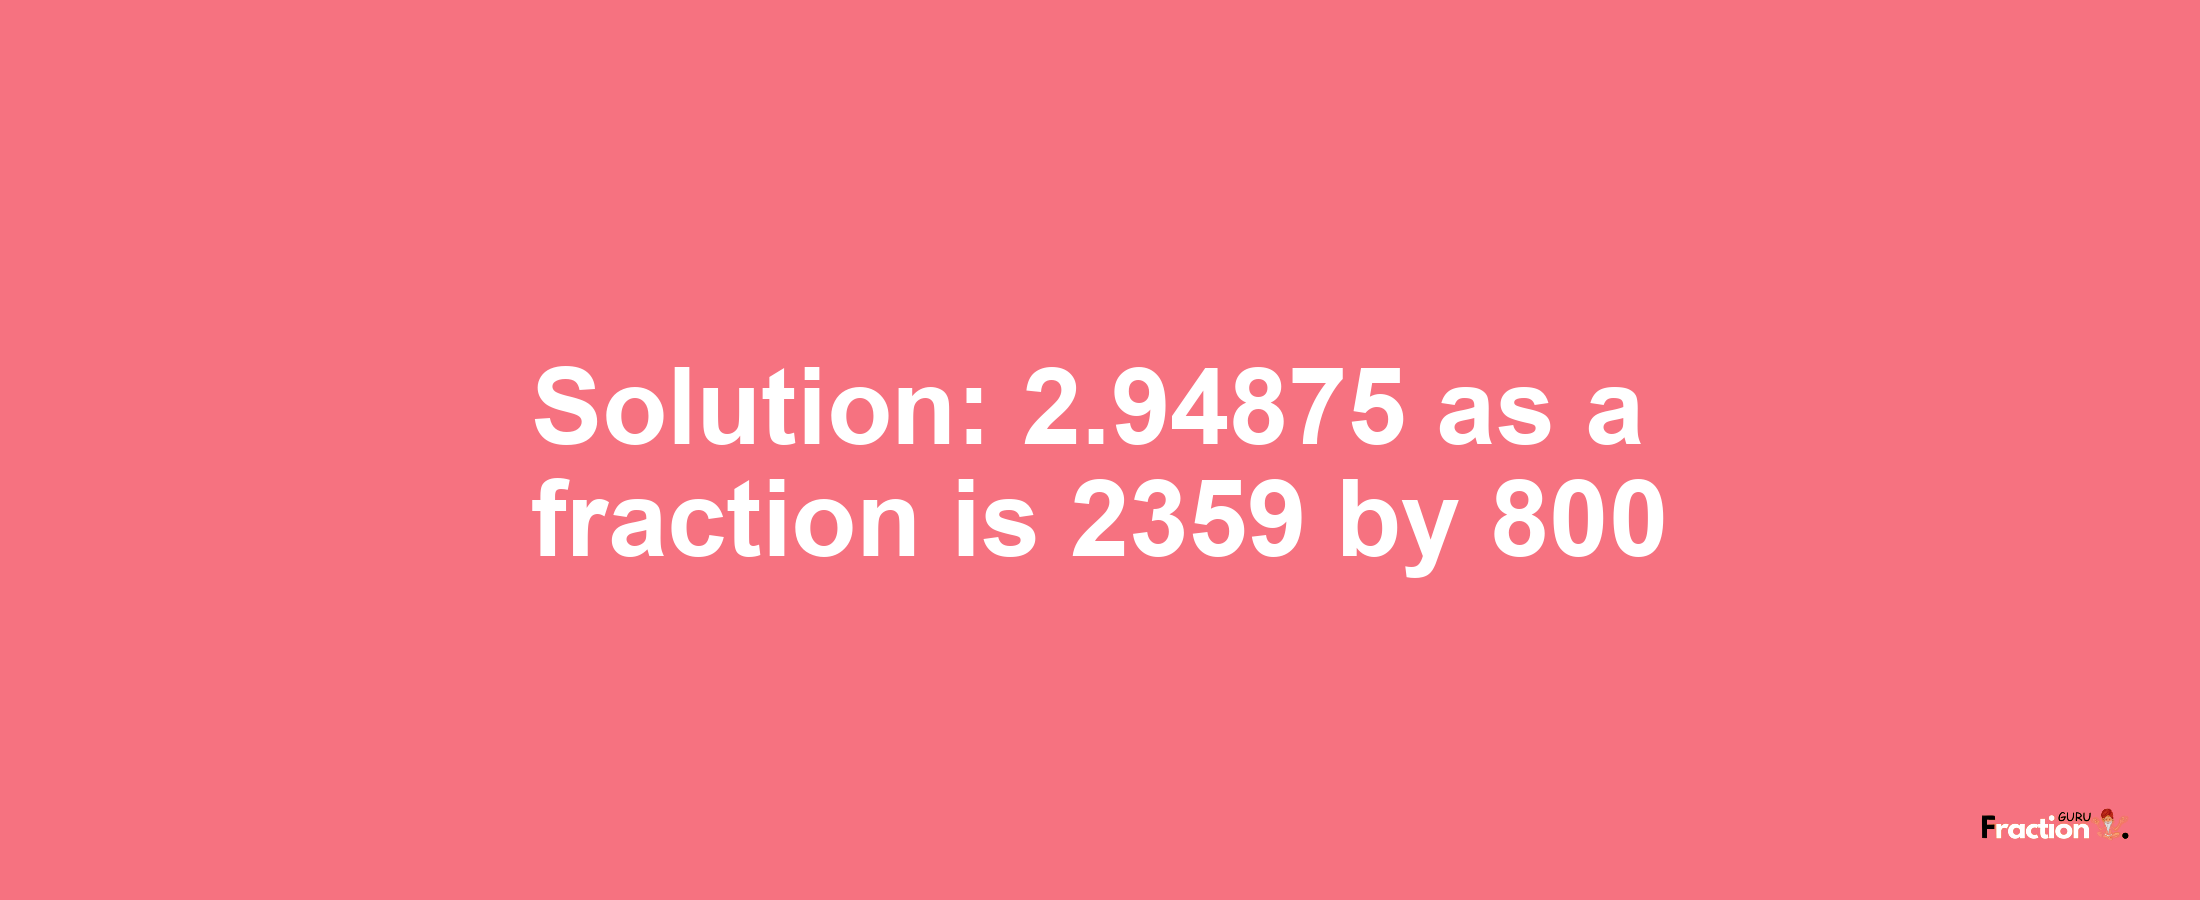 Solution:2.94875 as a fraction is 2359/800